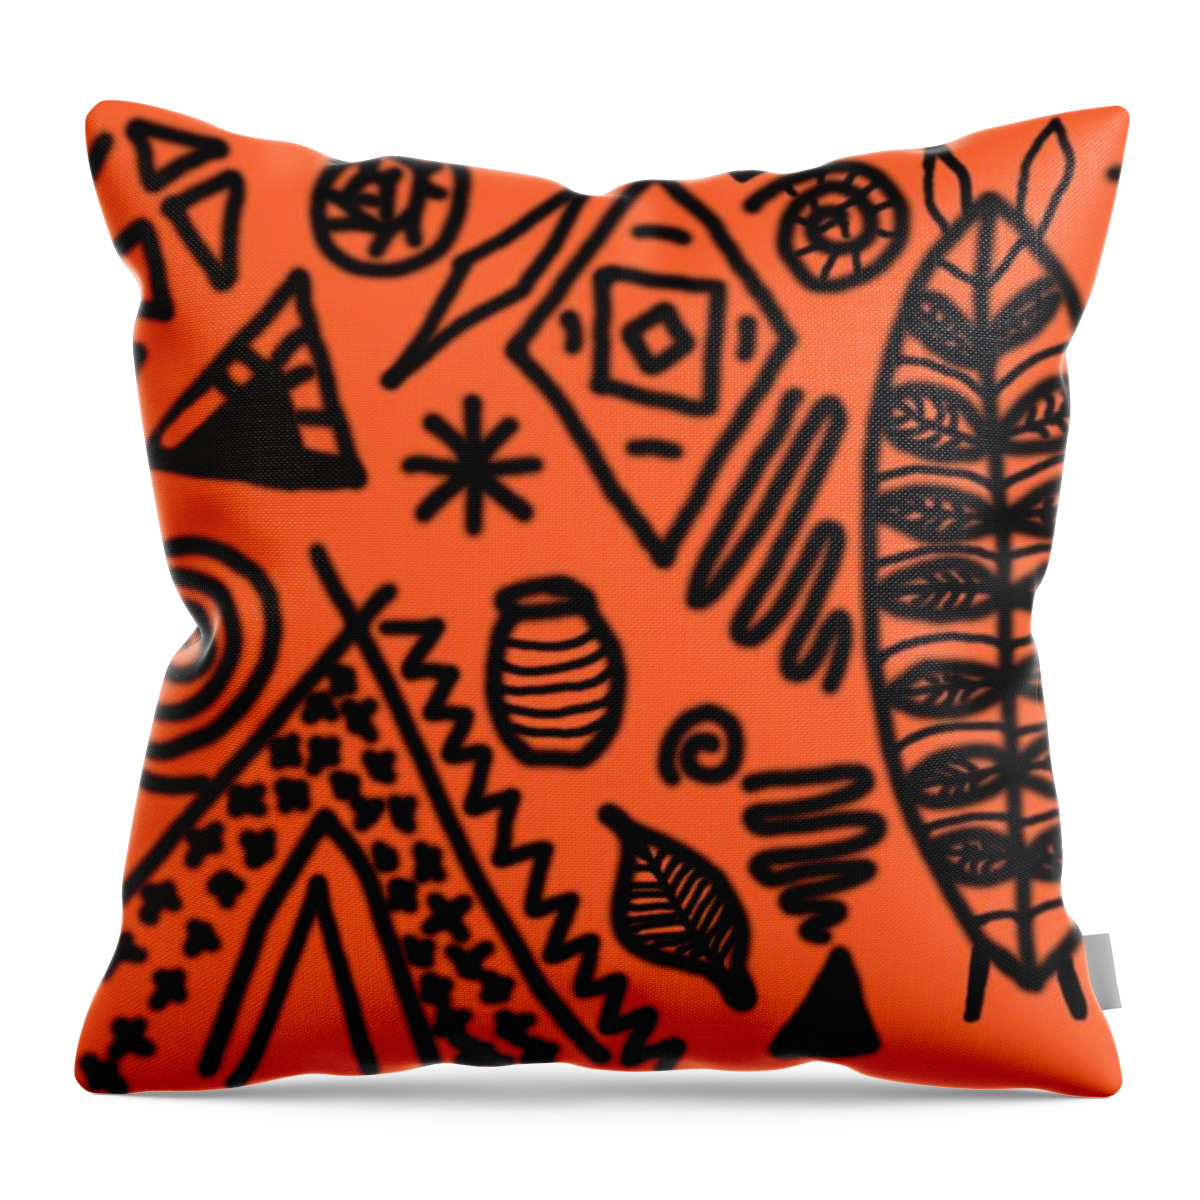 Orange Throw Pillow featuring the digital art Suitability by Christopher Rowlands